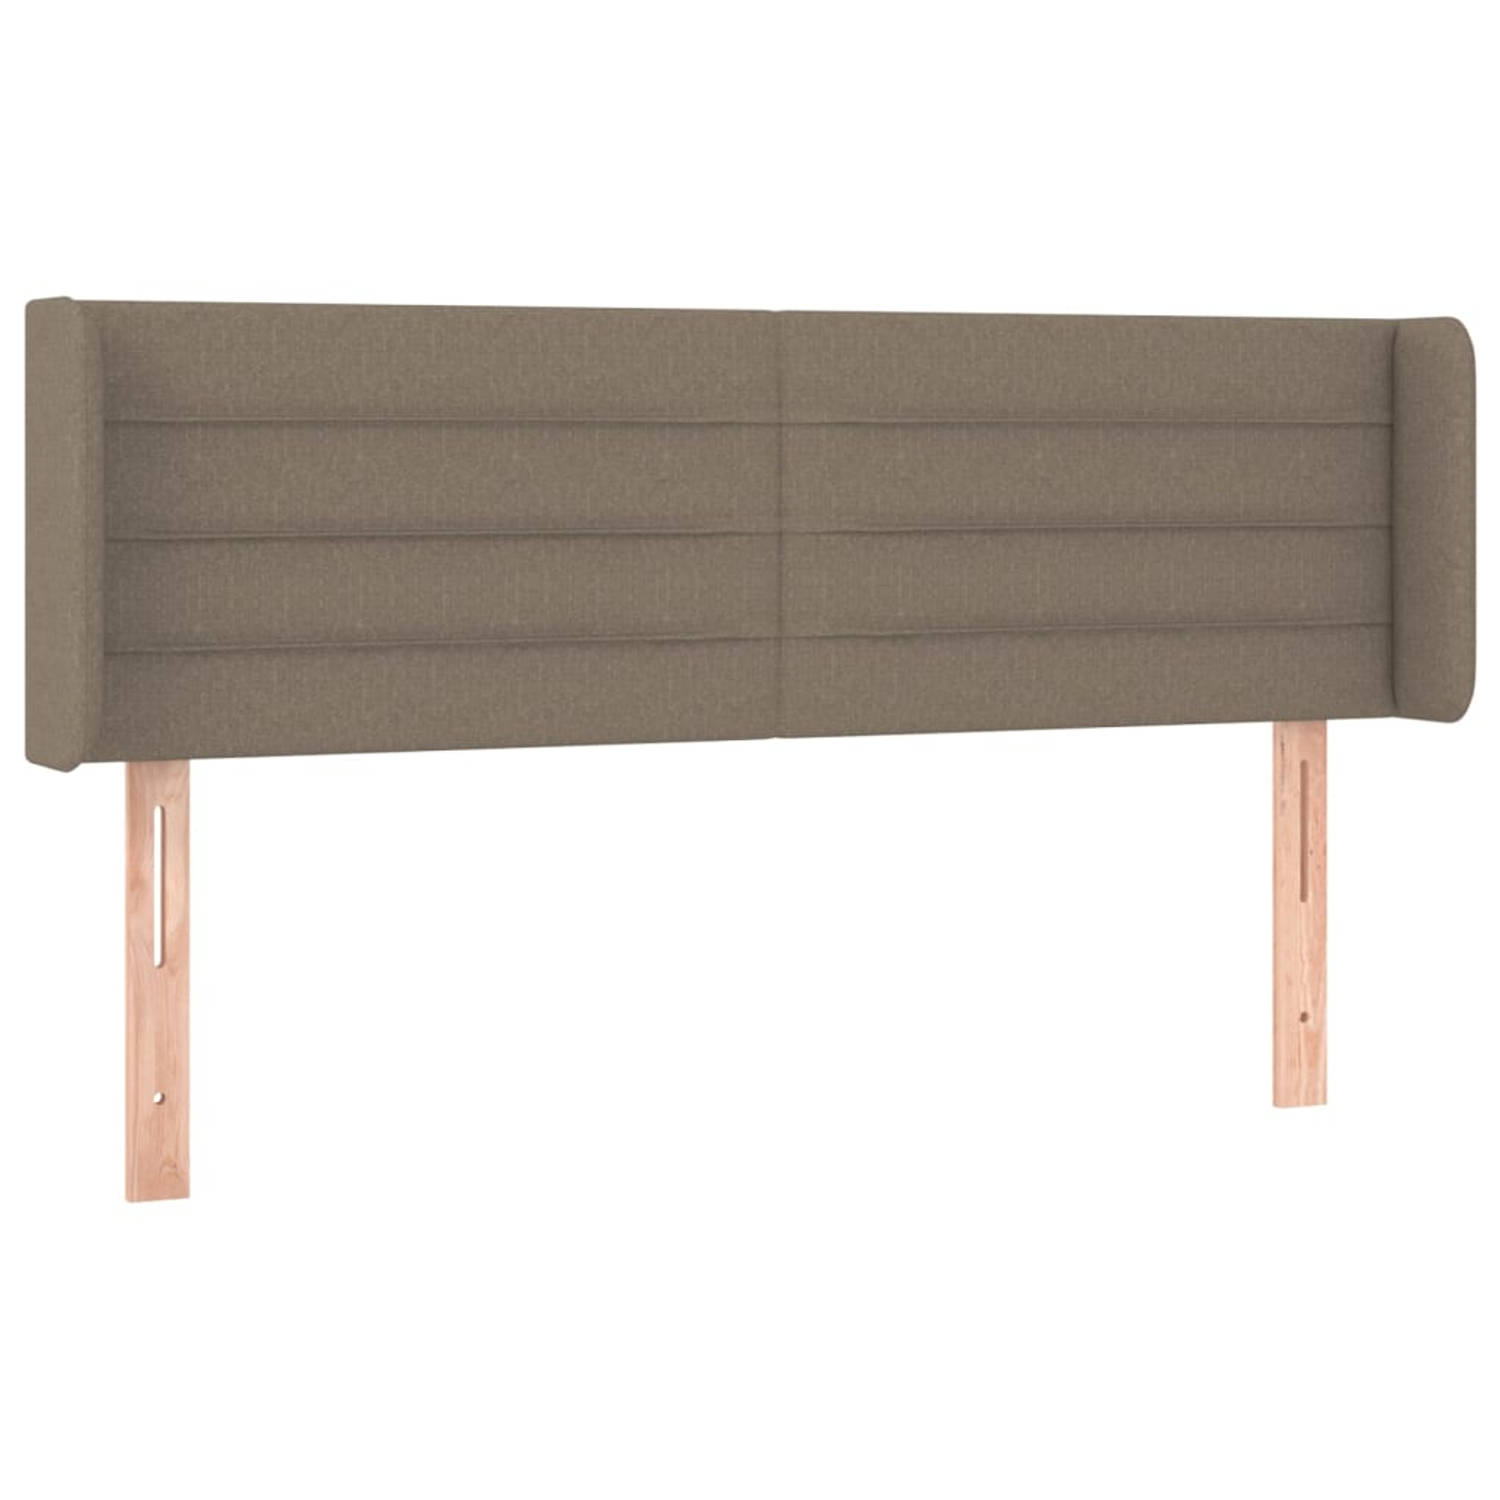 The Living Store Hoofdeind - Taupe - 147 x 16 x 78/88 cm - Duurzaam materiaal